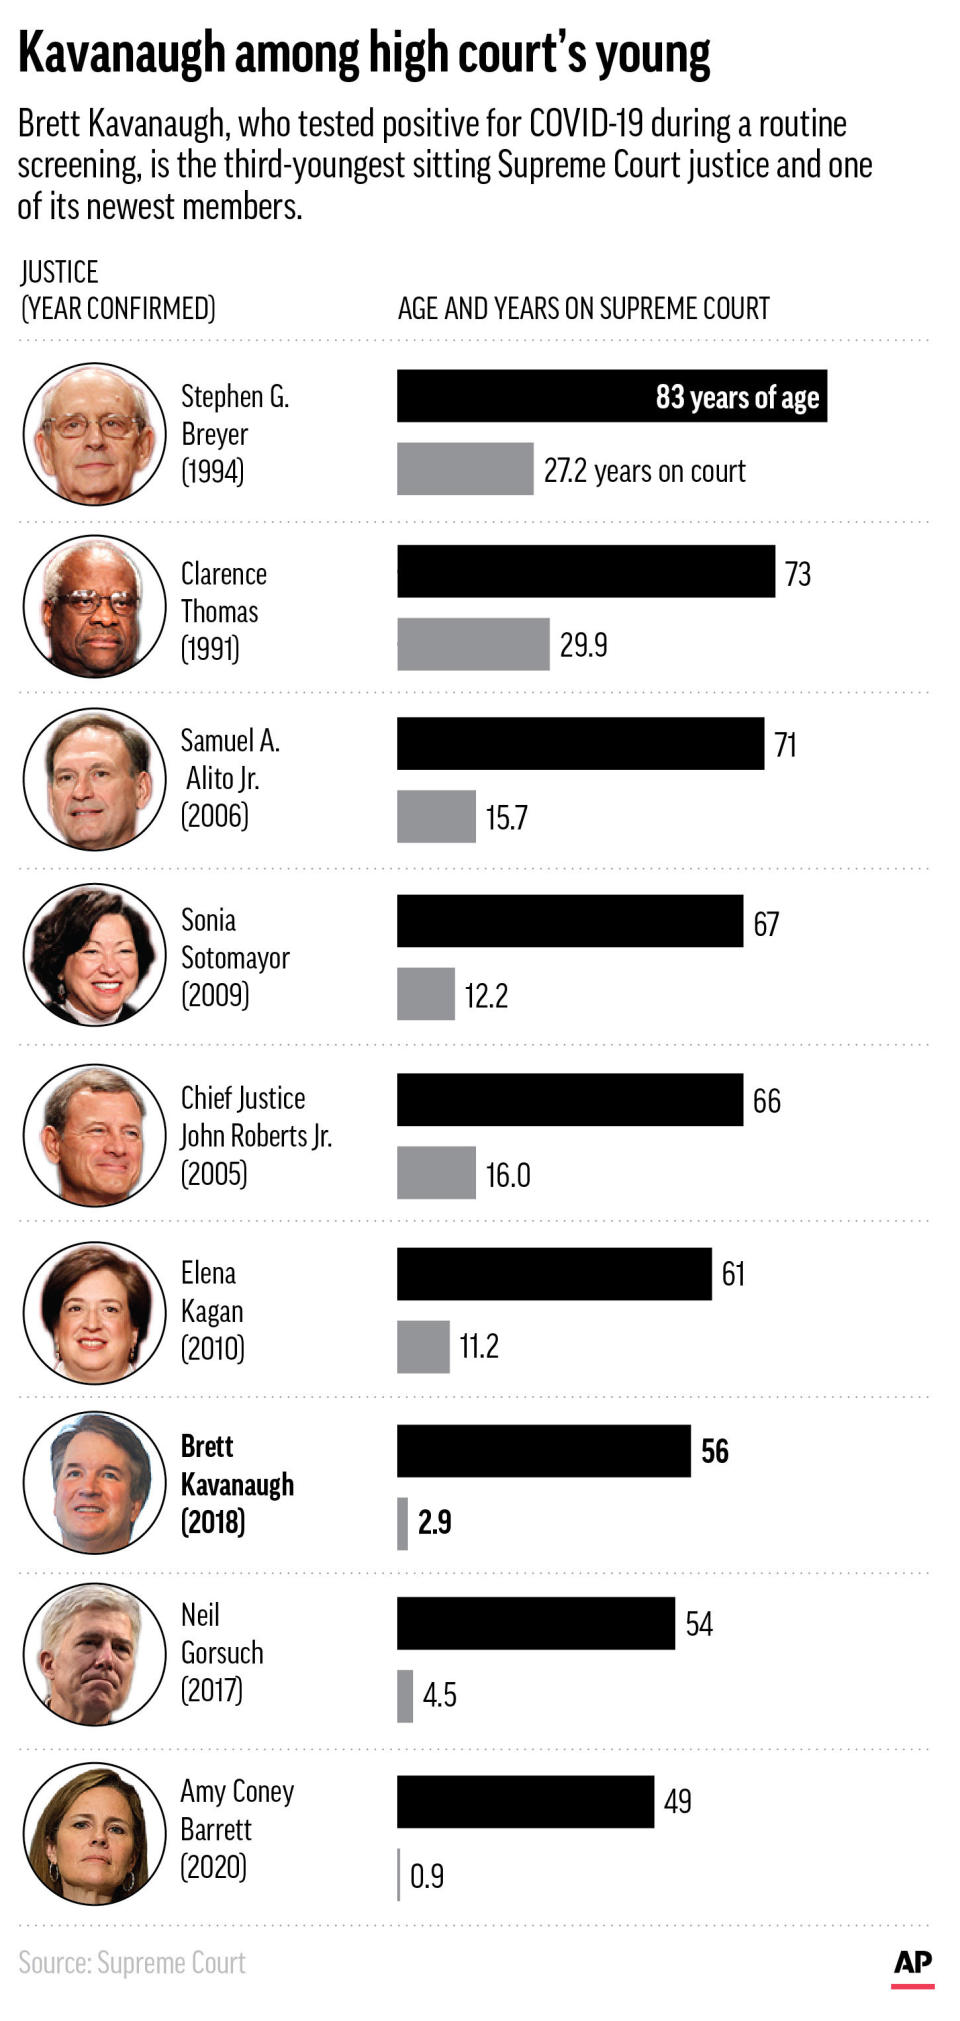 Supreme Court Justice Brett Kavanaugh is among the youngest and newest of the sitting justices. (AP Graphic)